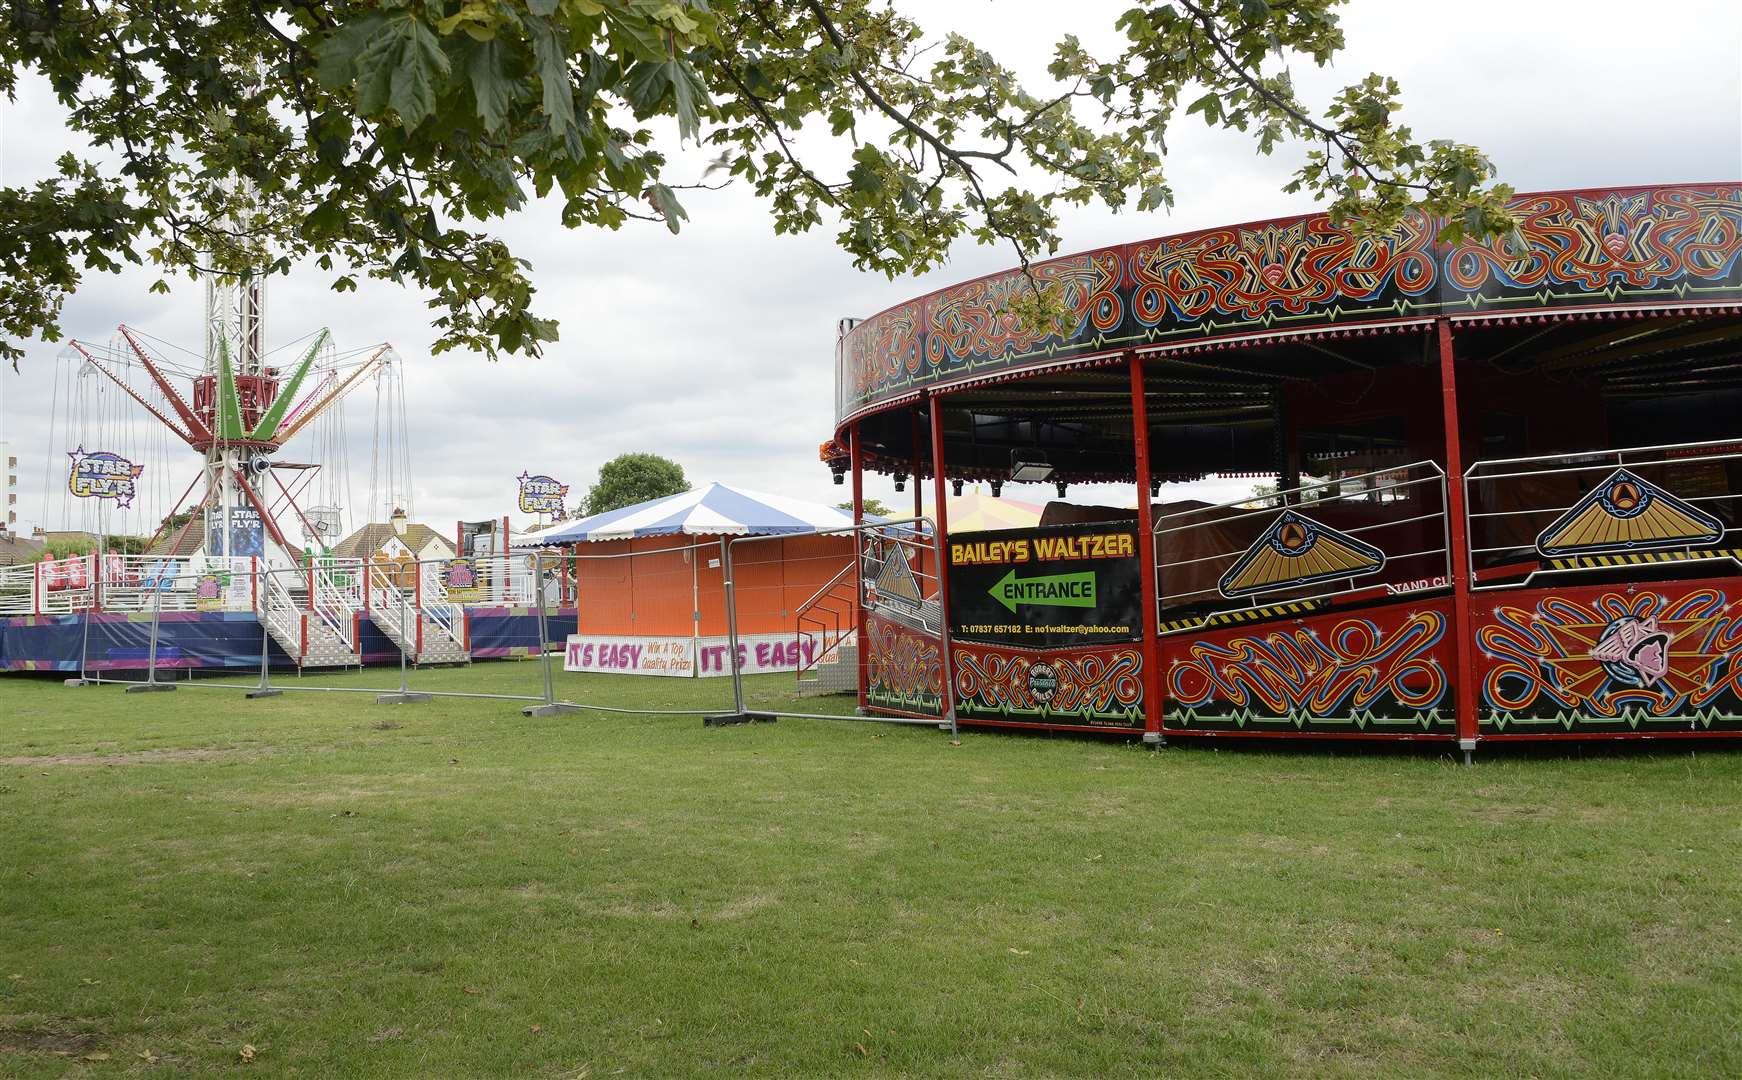 The funfair is regularly held at the town’s Memorial Park